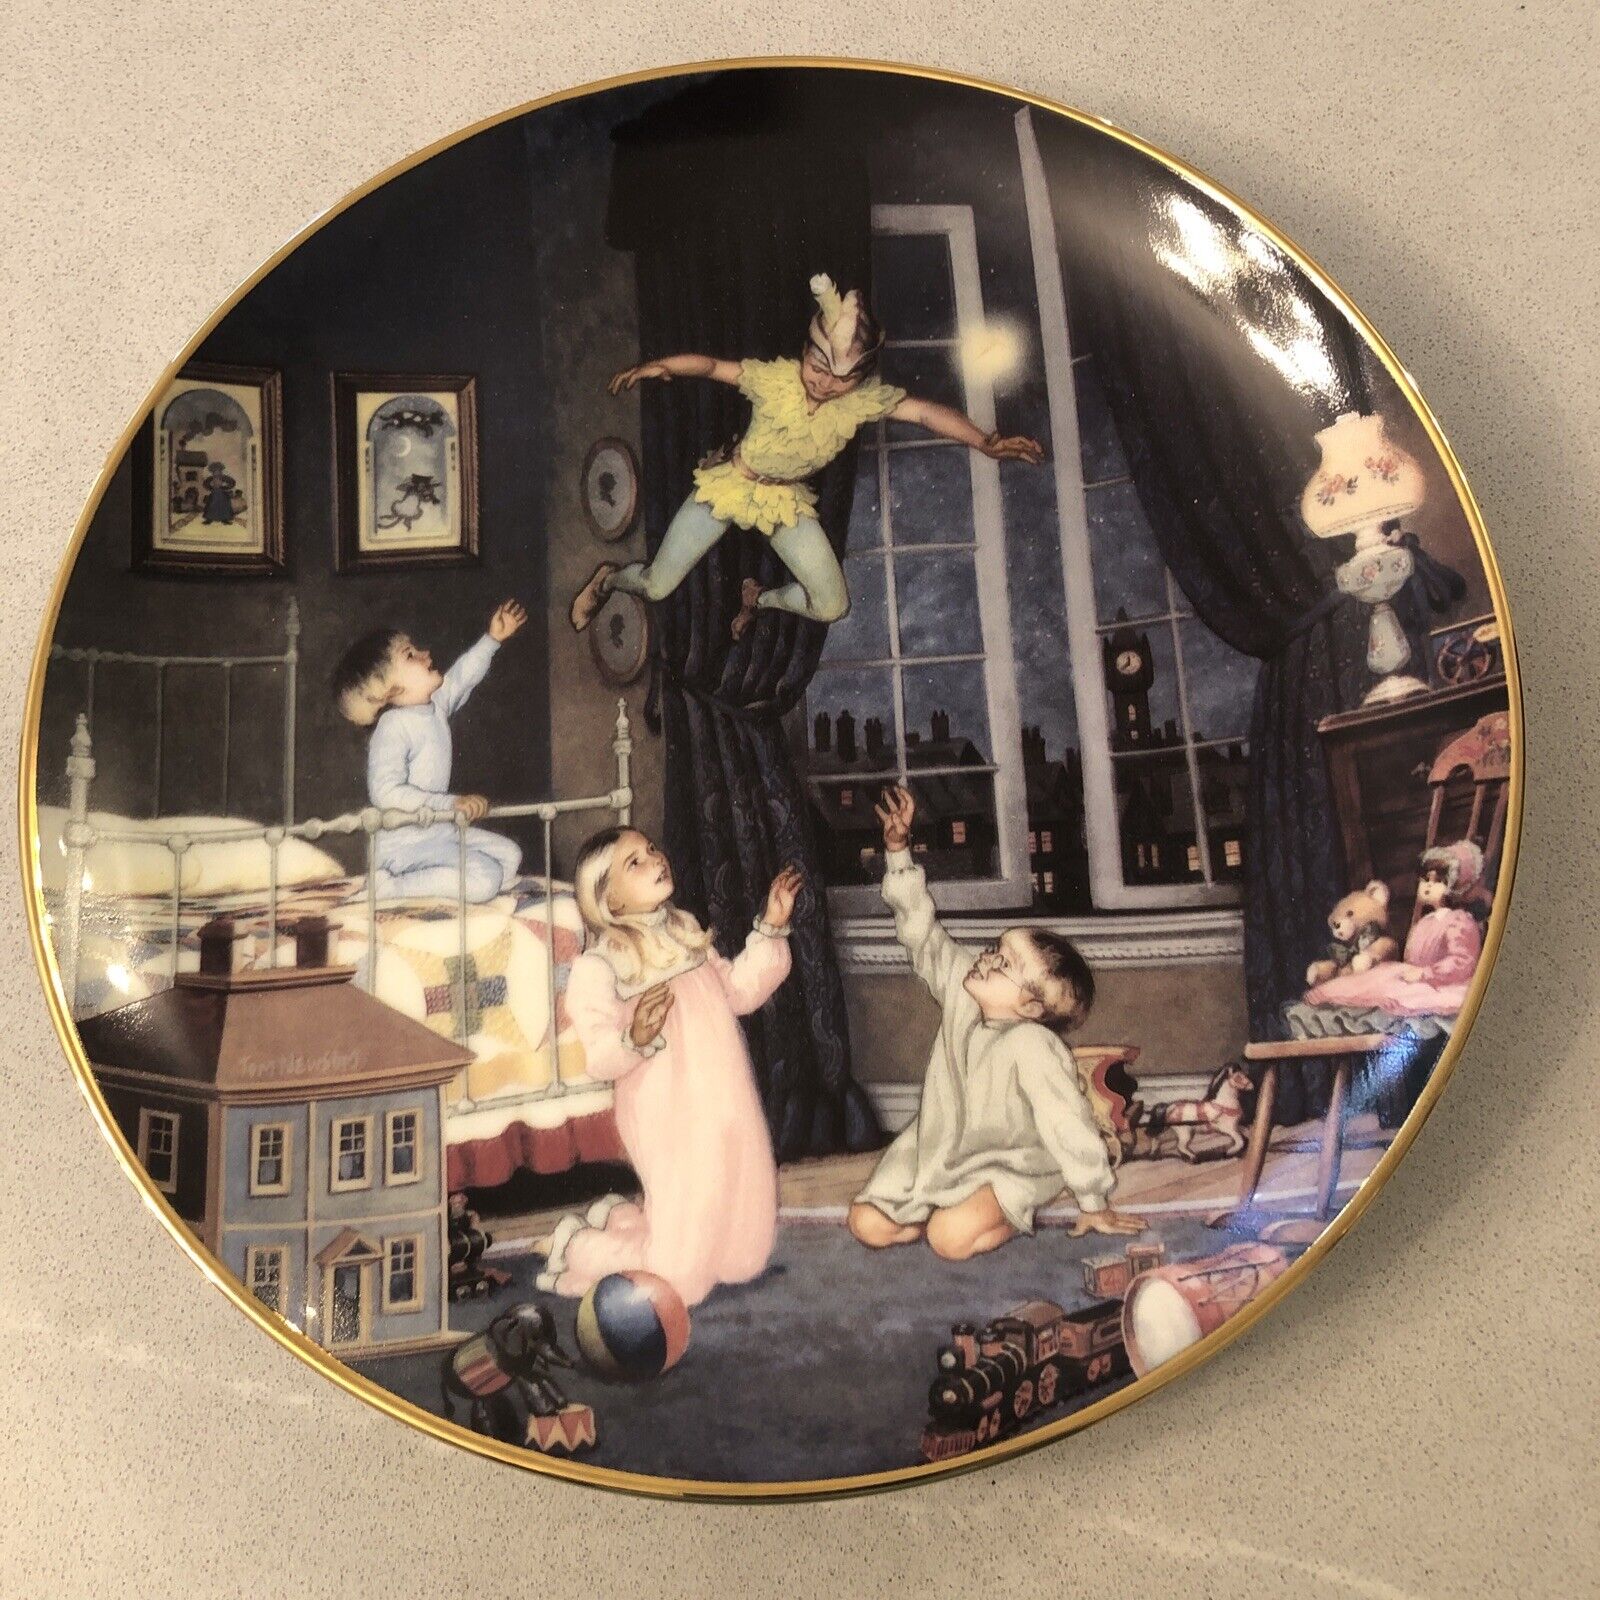 LOOK AT ME Plate The Adventures of Peter Pan Tom Newsom RARE Very Hard to Find